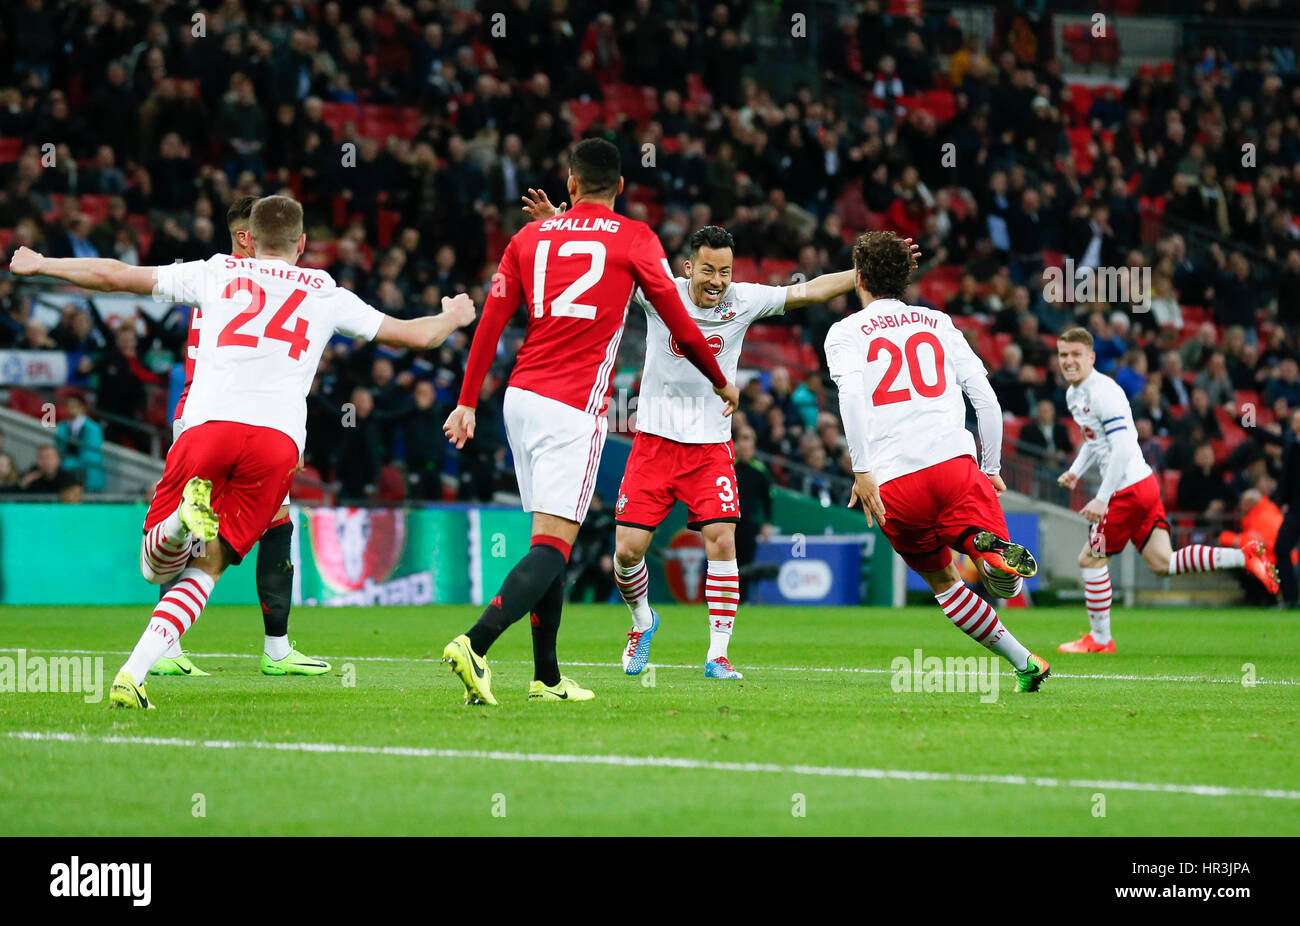 London, UK. 26th Feb, 2017. Southampton's Manolo Gabbiadini (2nd R) celebrates after scoring during the EFL Cup Final between Manchester United and Southampton at Wembley Stadium in London, Britain on Feb. 26, 2017. Credit: Han Yan/Xinhua/Alamy Live News Stock Photo